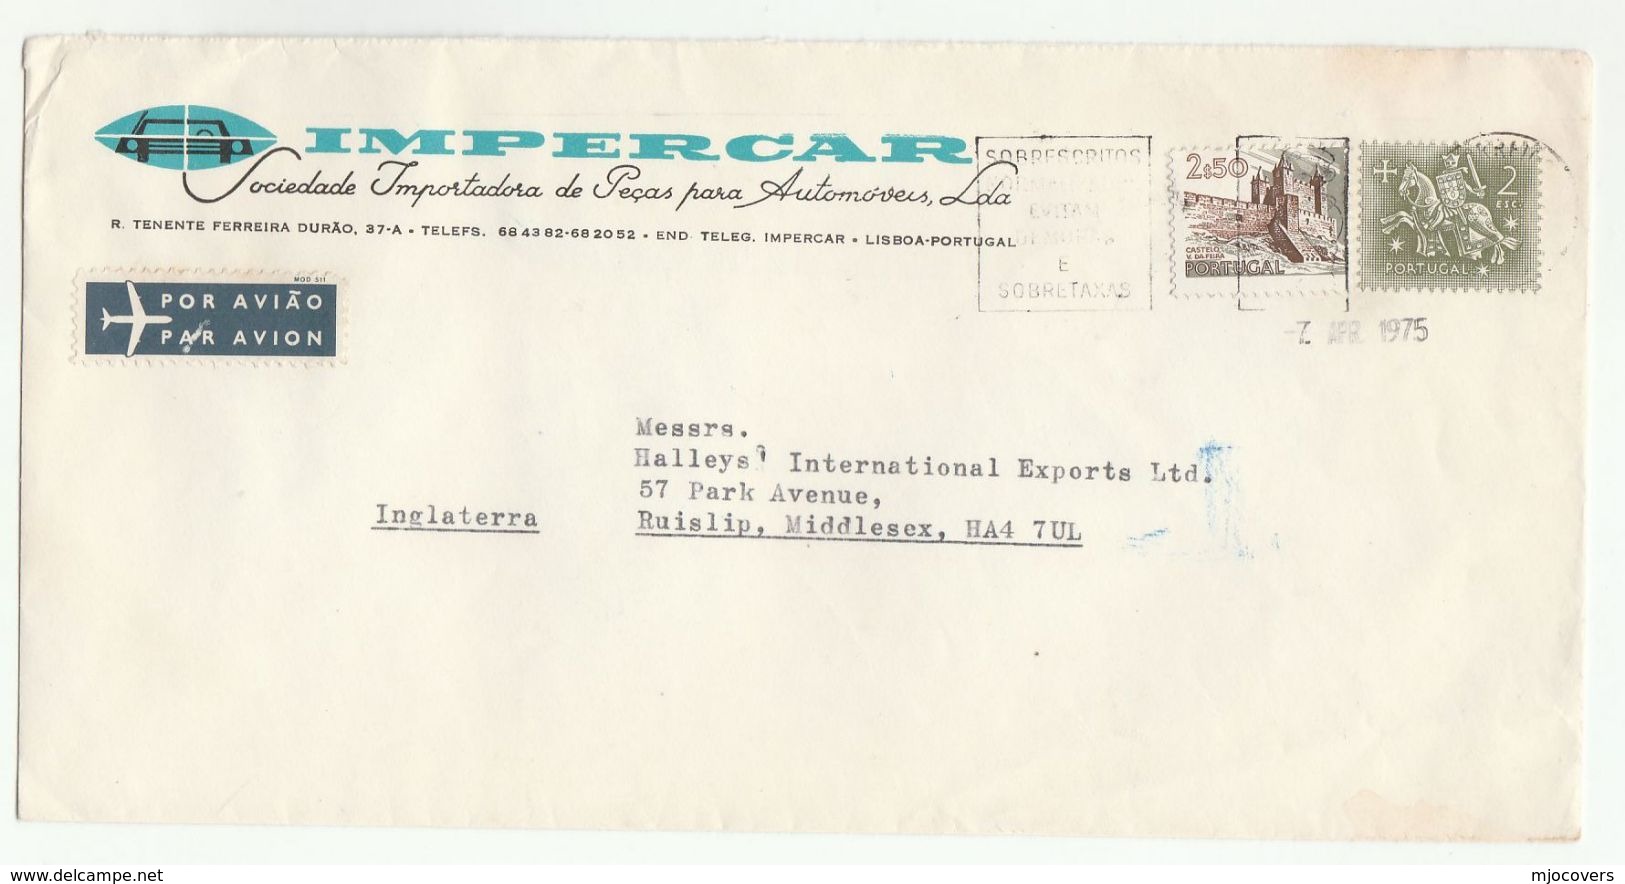 1975 Air Mail PORTUGAL Illus ADVERT COVER Impercar Auto Co KNIGHT HORSE Stamps To GB Airmail Label - Brieven En Documenten